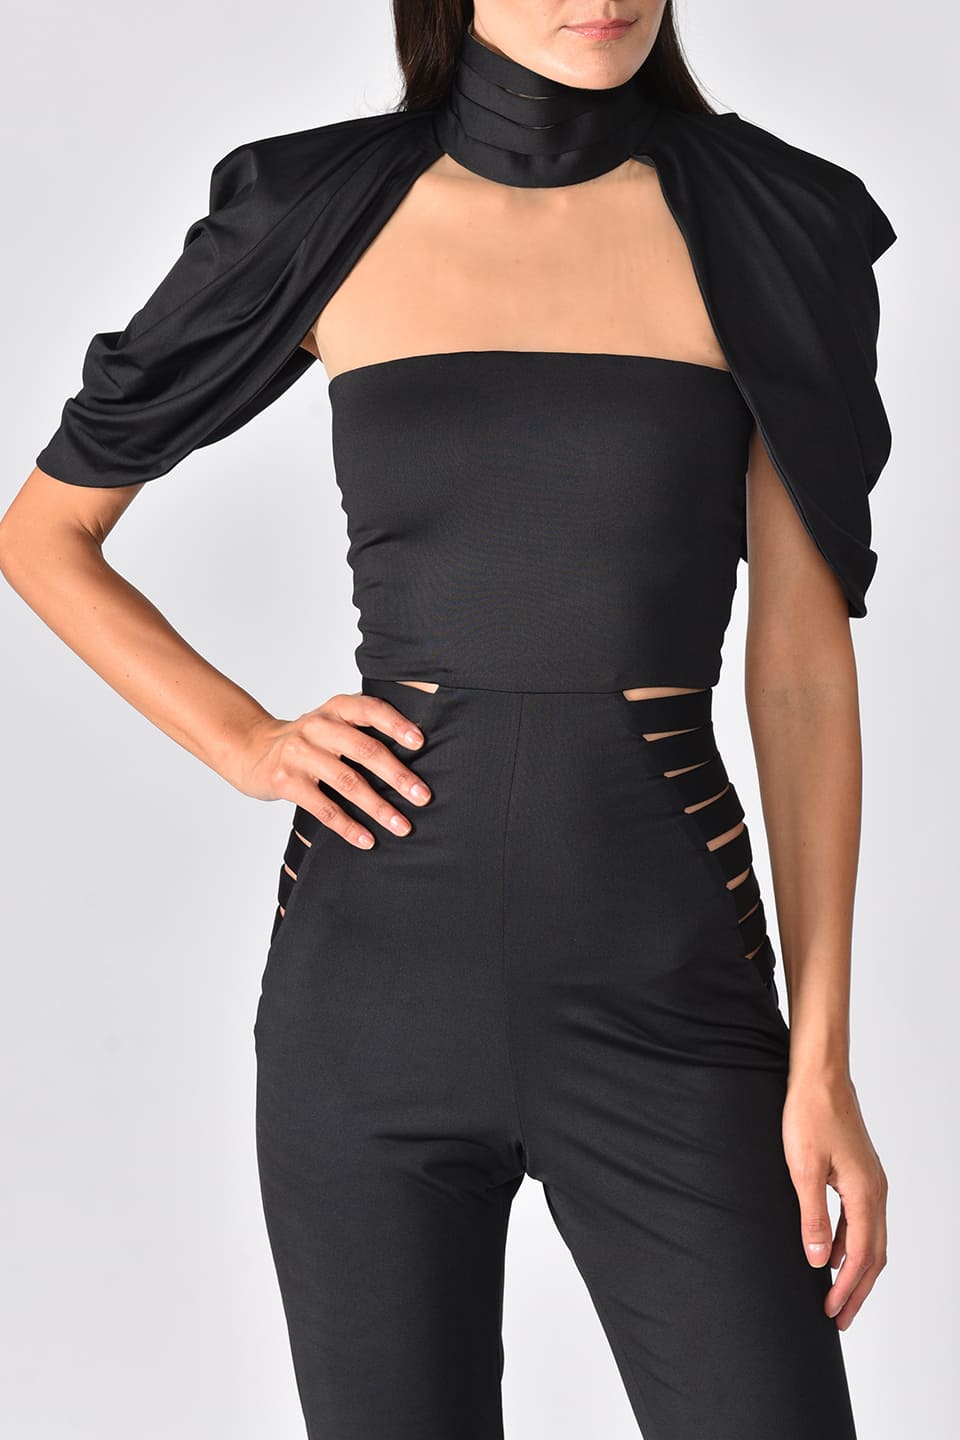 Thumbnail for Product gallery 1, Shop online jumpsuit from fashion designer in black color and stretchy fabric